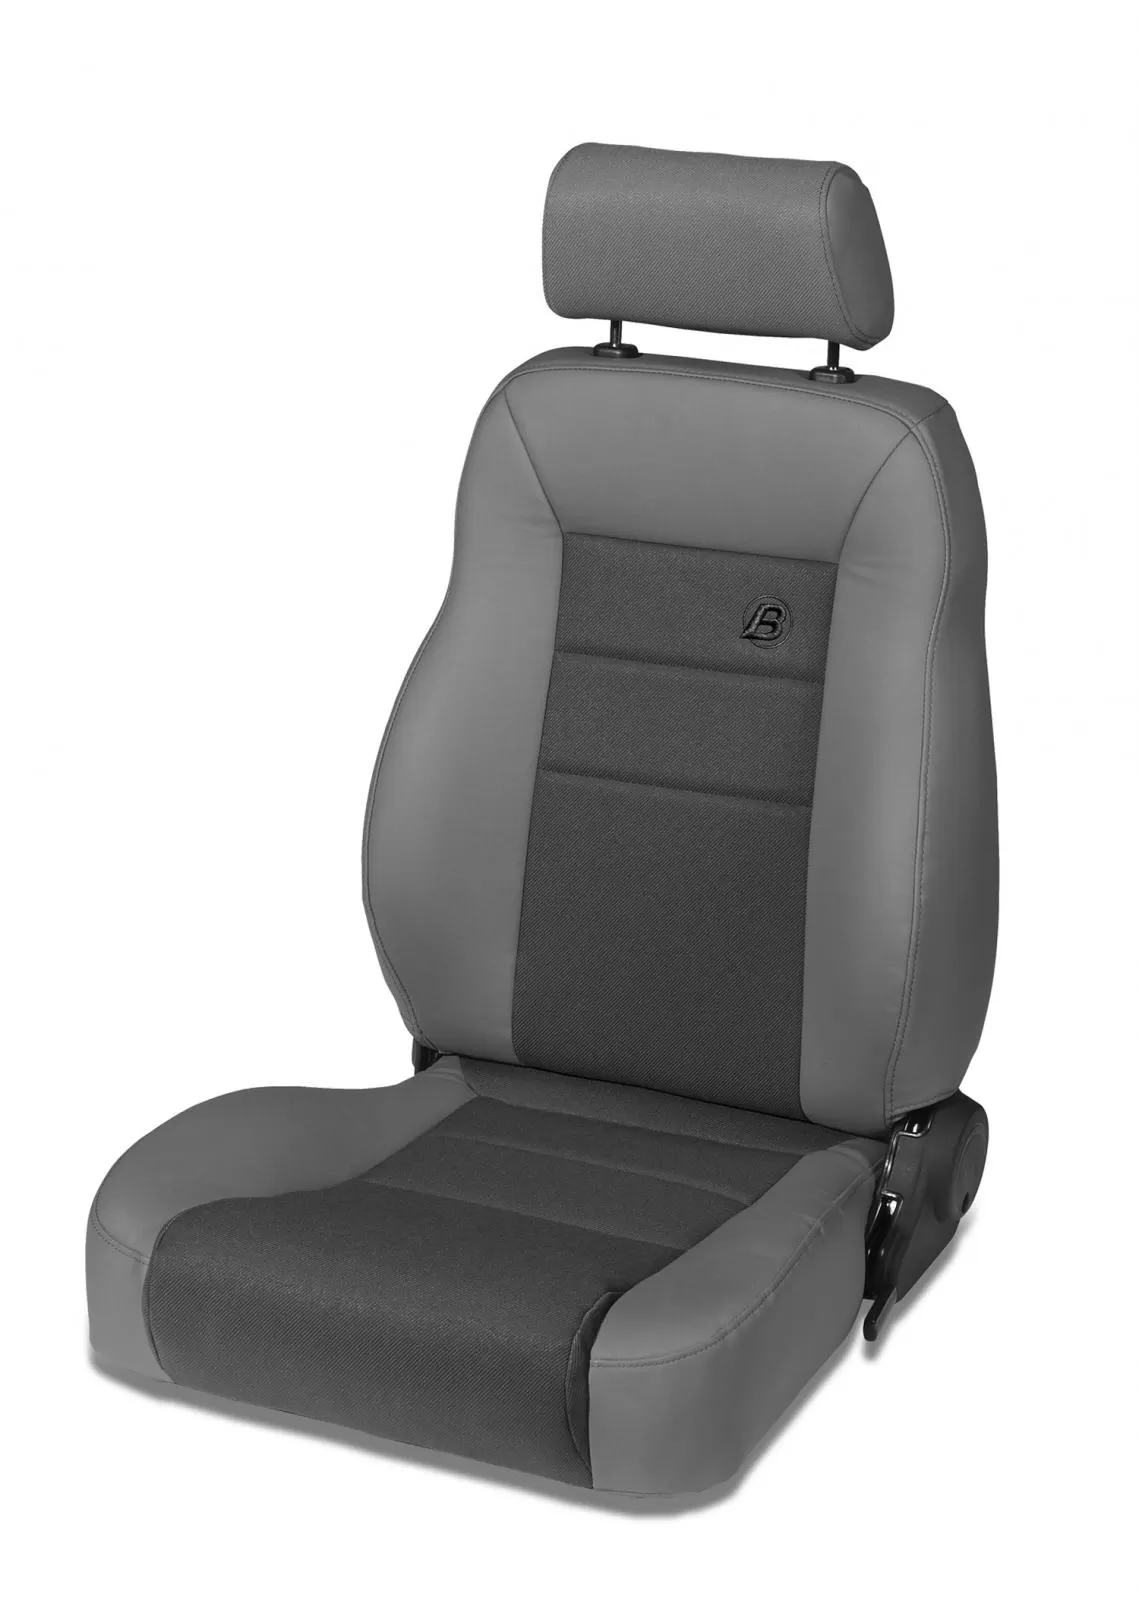 Bestop Fabric Charcoal/Gray Front Driver Side Trailmax II Pro Front Seat Jeep CJ-7 | Wrangler YJ 1976-2006 - 39461-09